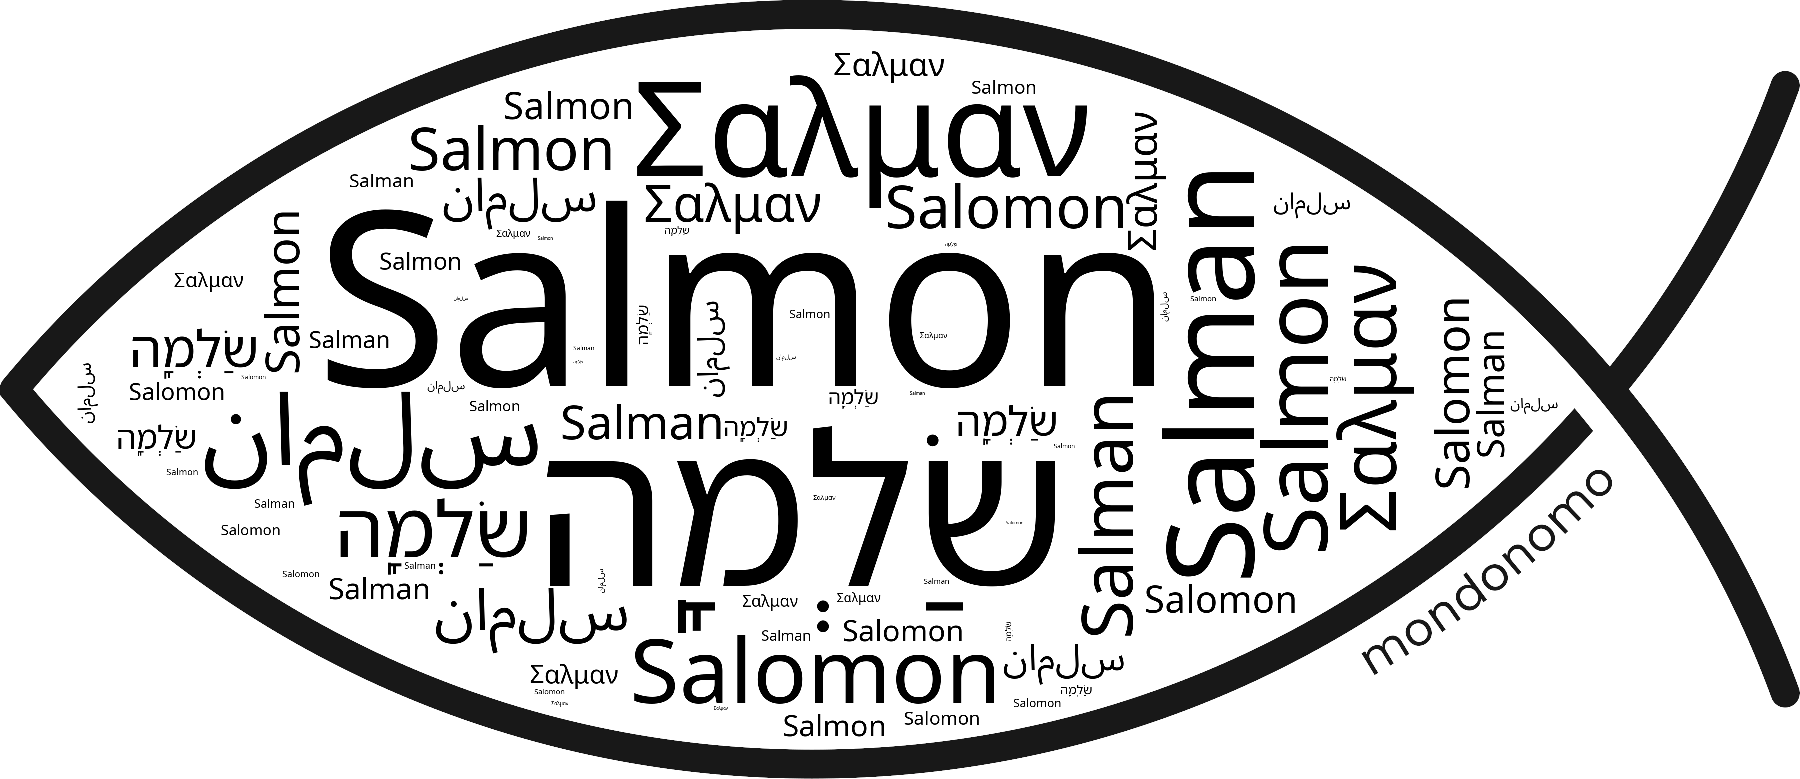 Name Salmon in the world's Bibles